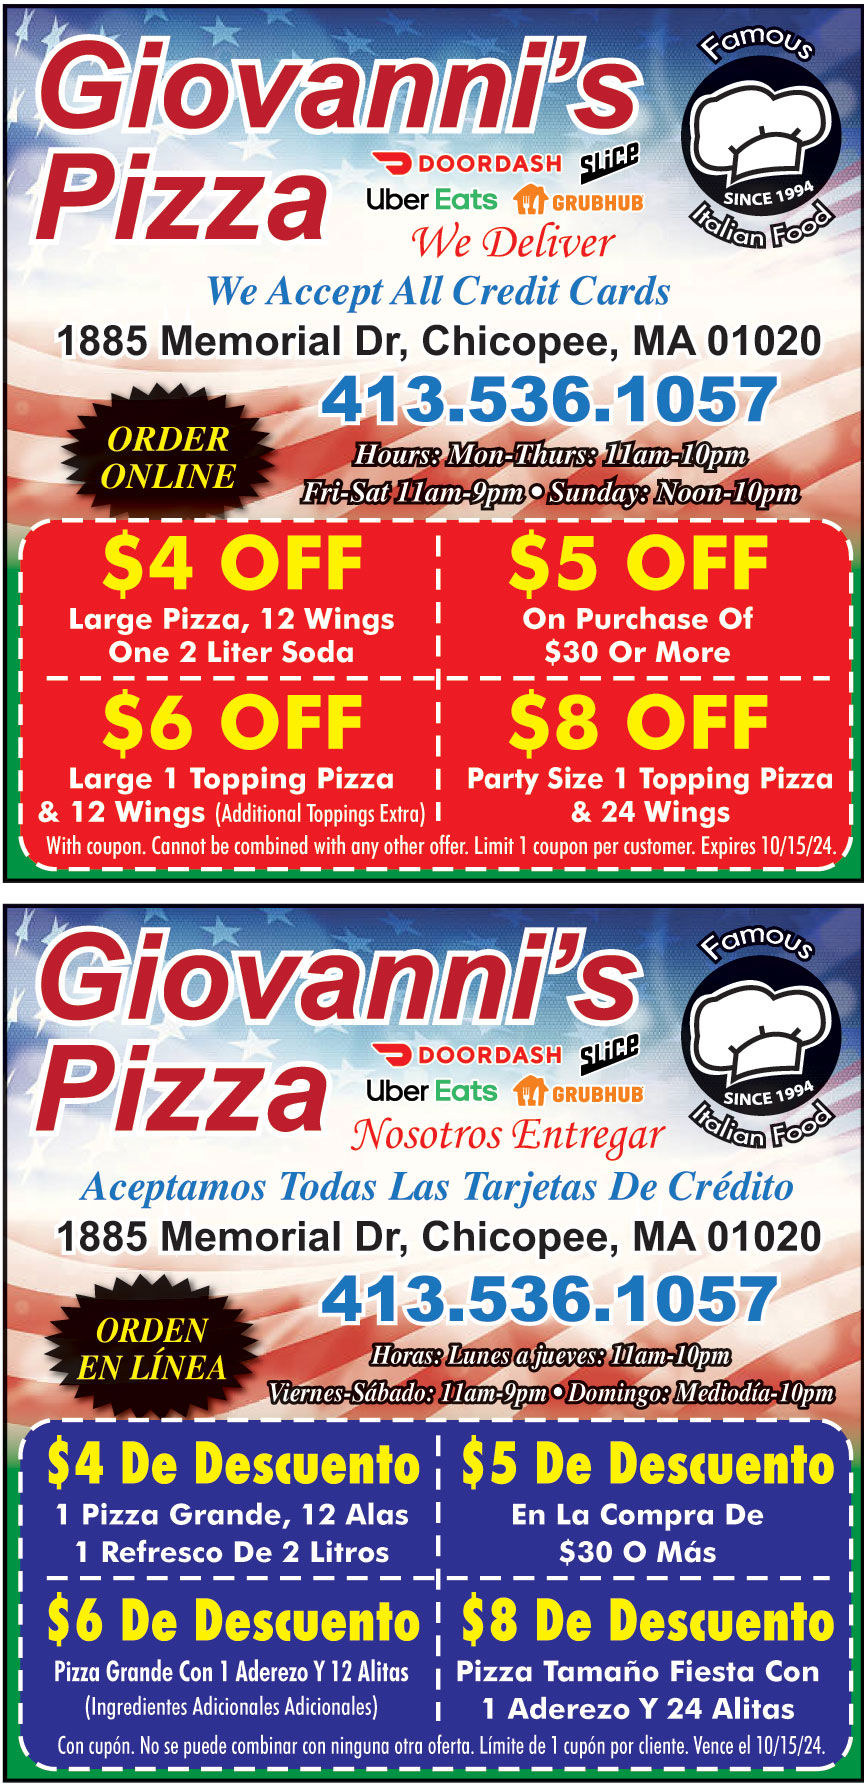 GIOVANNIS PIZZA